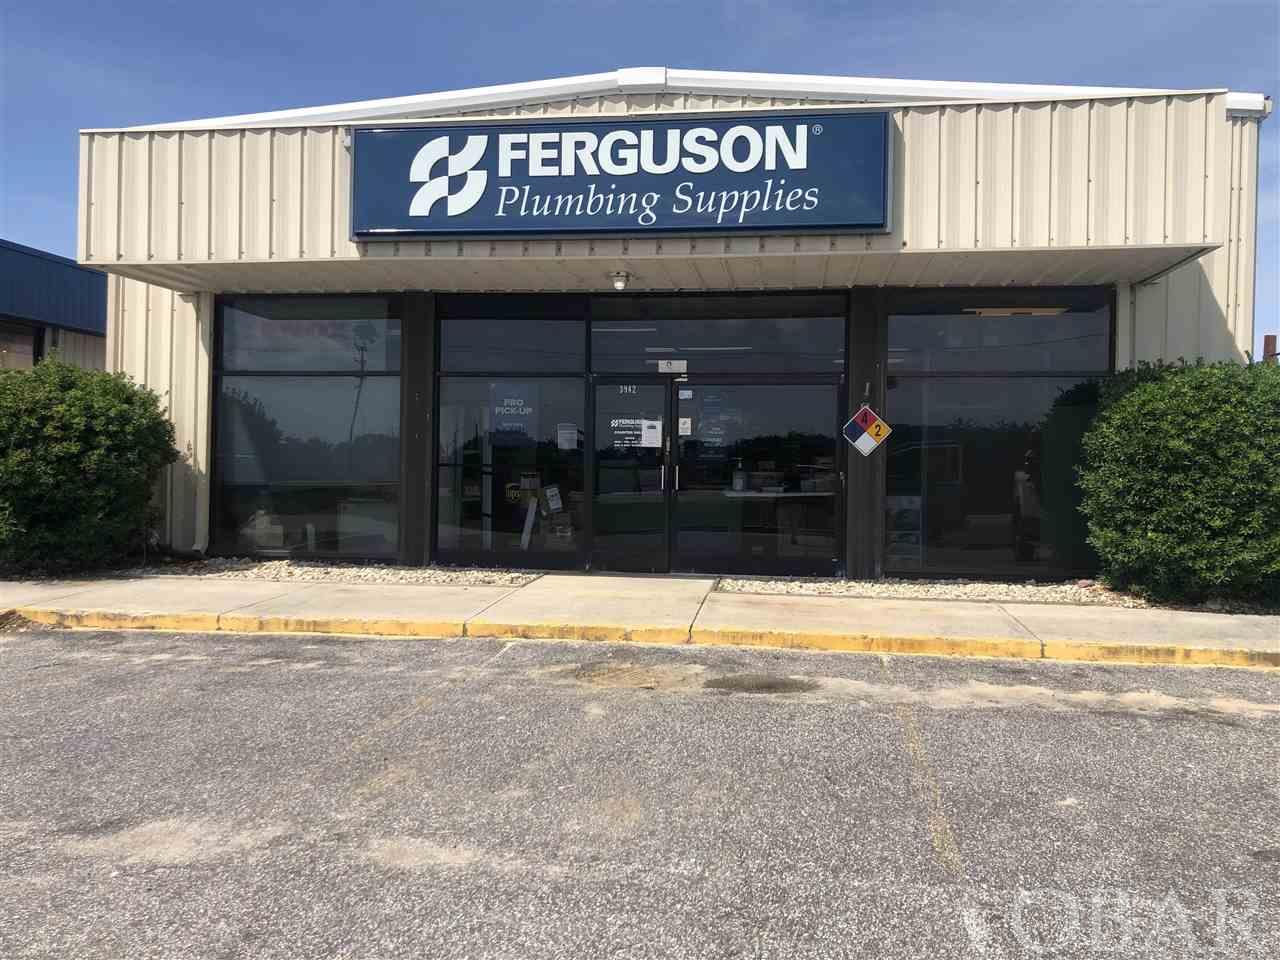 Great investment opportunity with a long term tenant in place since 1986. The current tenant has two options to renew. 5.46 CAP Rate.